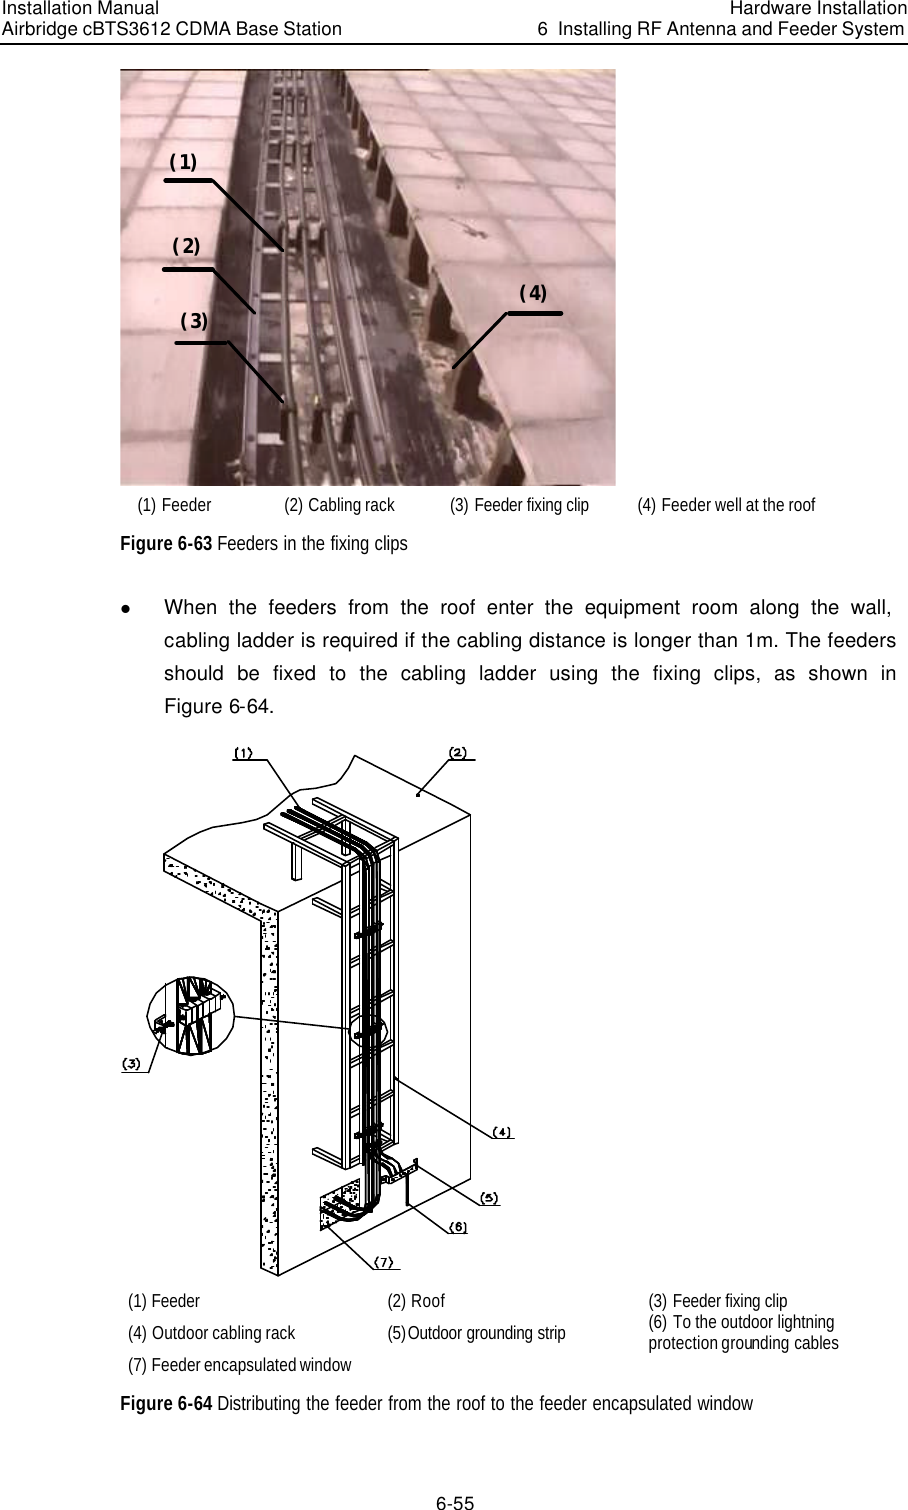 Installation Manual Airbridge cBTS3612 CDMA Base Station Hardware Installation6  Installing RF Antenna and Feeder System 6-55 （１）（２）（３） （４） (1) Feeder  (2) Cabling rack  (3) Feeder fixing clip (4) Feeder well at the roof Figure 6-63 Feeders in the fixing clips l When the feeders from the roof enter the equipment room along the wall, cabling ladder is required if the cabling distance is longer than 1m. The feeders should be fixed to the cabling ladder using the fixing clips, as shown in     Figure 6-64.  (1) Feeder (2) Roof (3) Feeder fixing clip (4) Outdoor cabling rack (5)Outdoor grounding strip  (6) To the outdoor lightning protection grounding cables (7) Feeder encapsulated window     Figure 6-64 Distributing the feeder from the roof to the feeder encapsulated window 